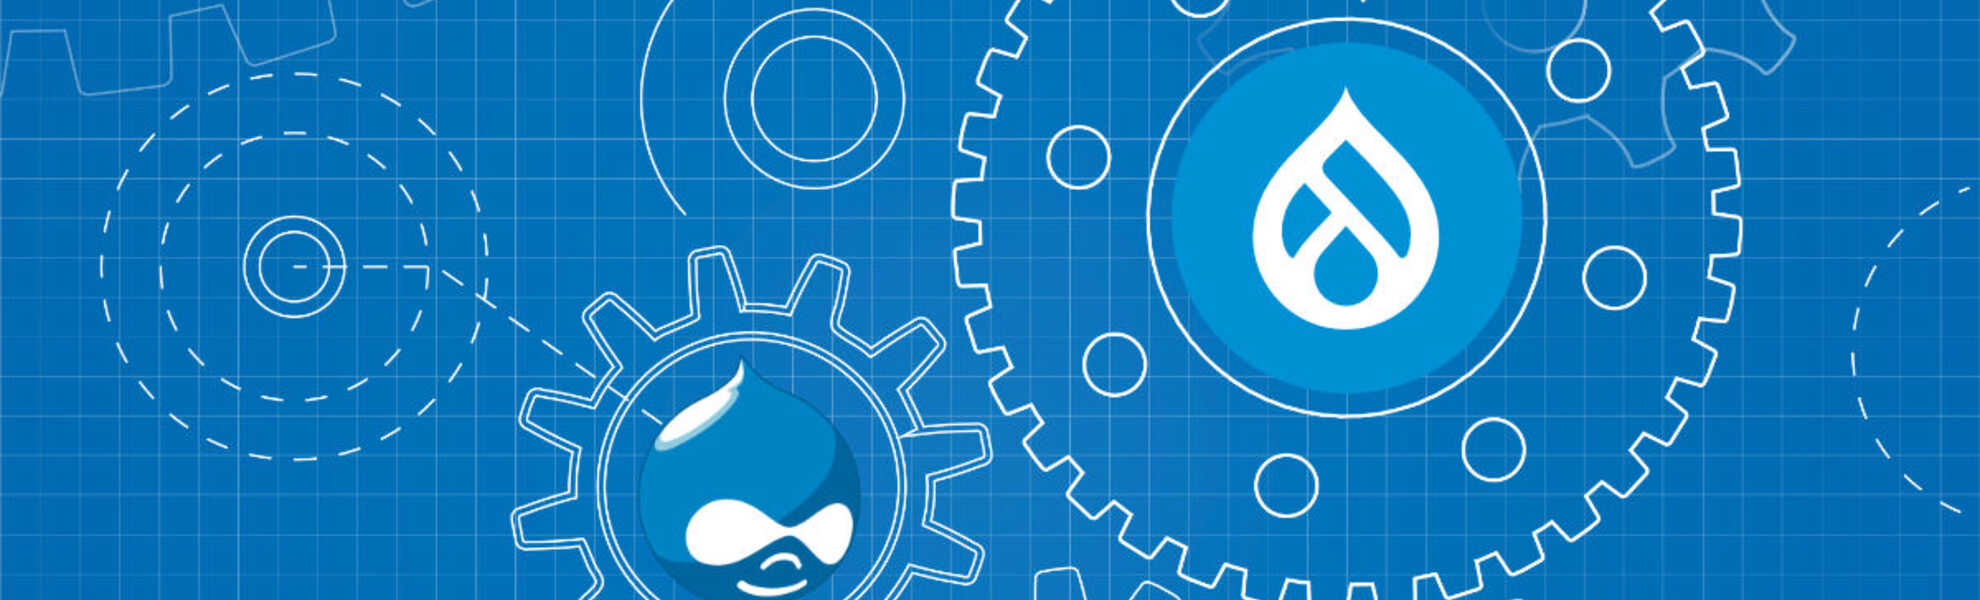 an image of a blueprint with gears and the logos of Drupal 7 and Drupal 9